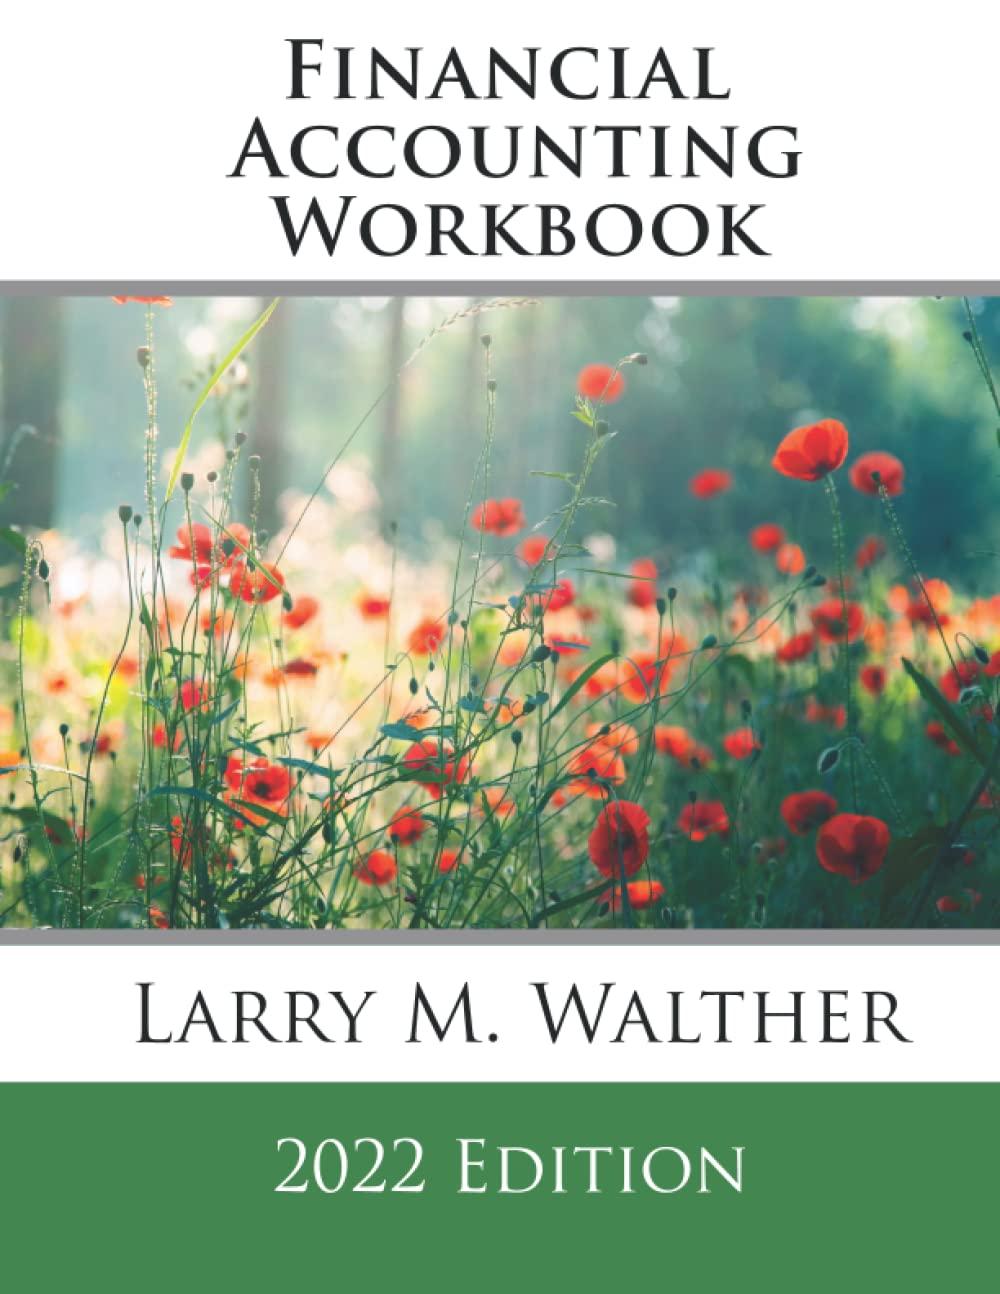 financial accounting workbook 2022nd edition larry m. walther 8785381483, 979-8785381483